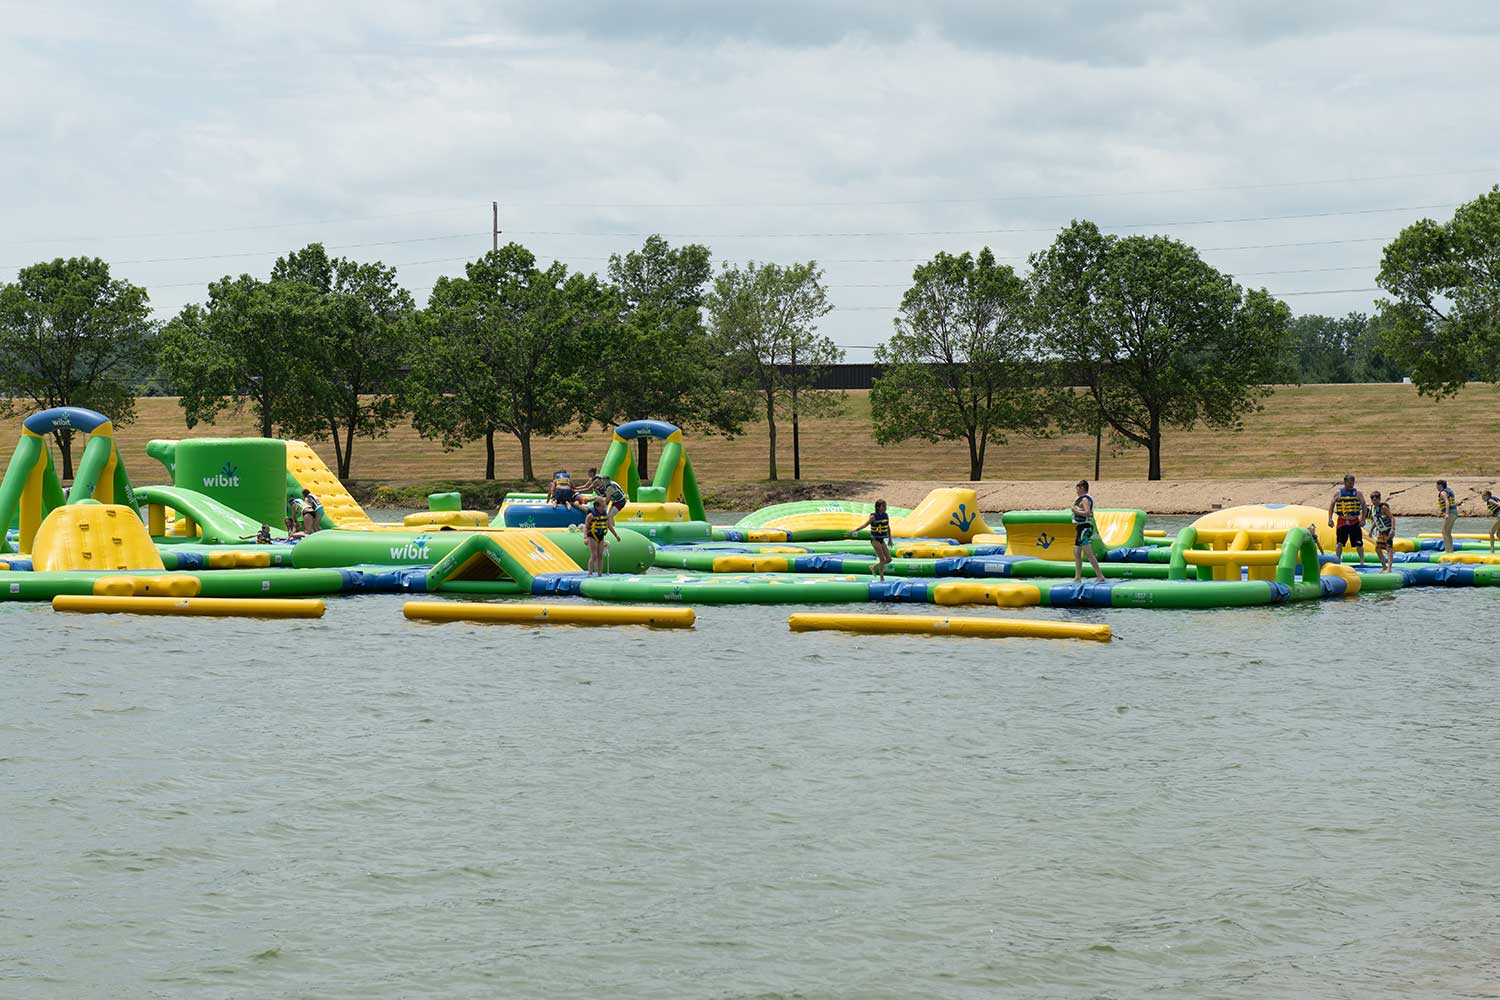 wibit water course, attractions